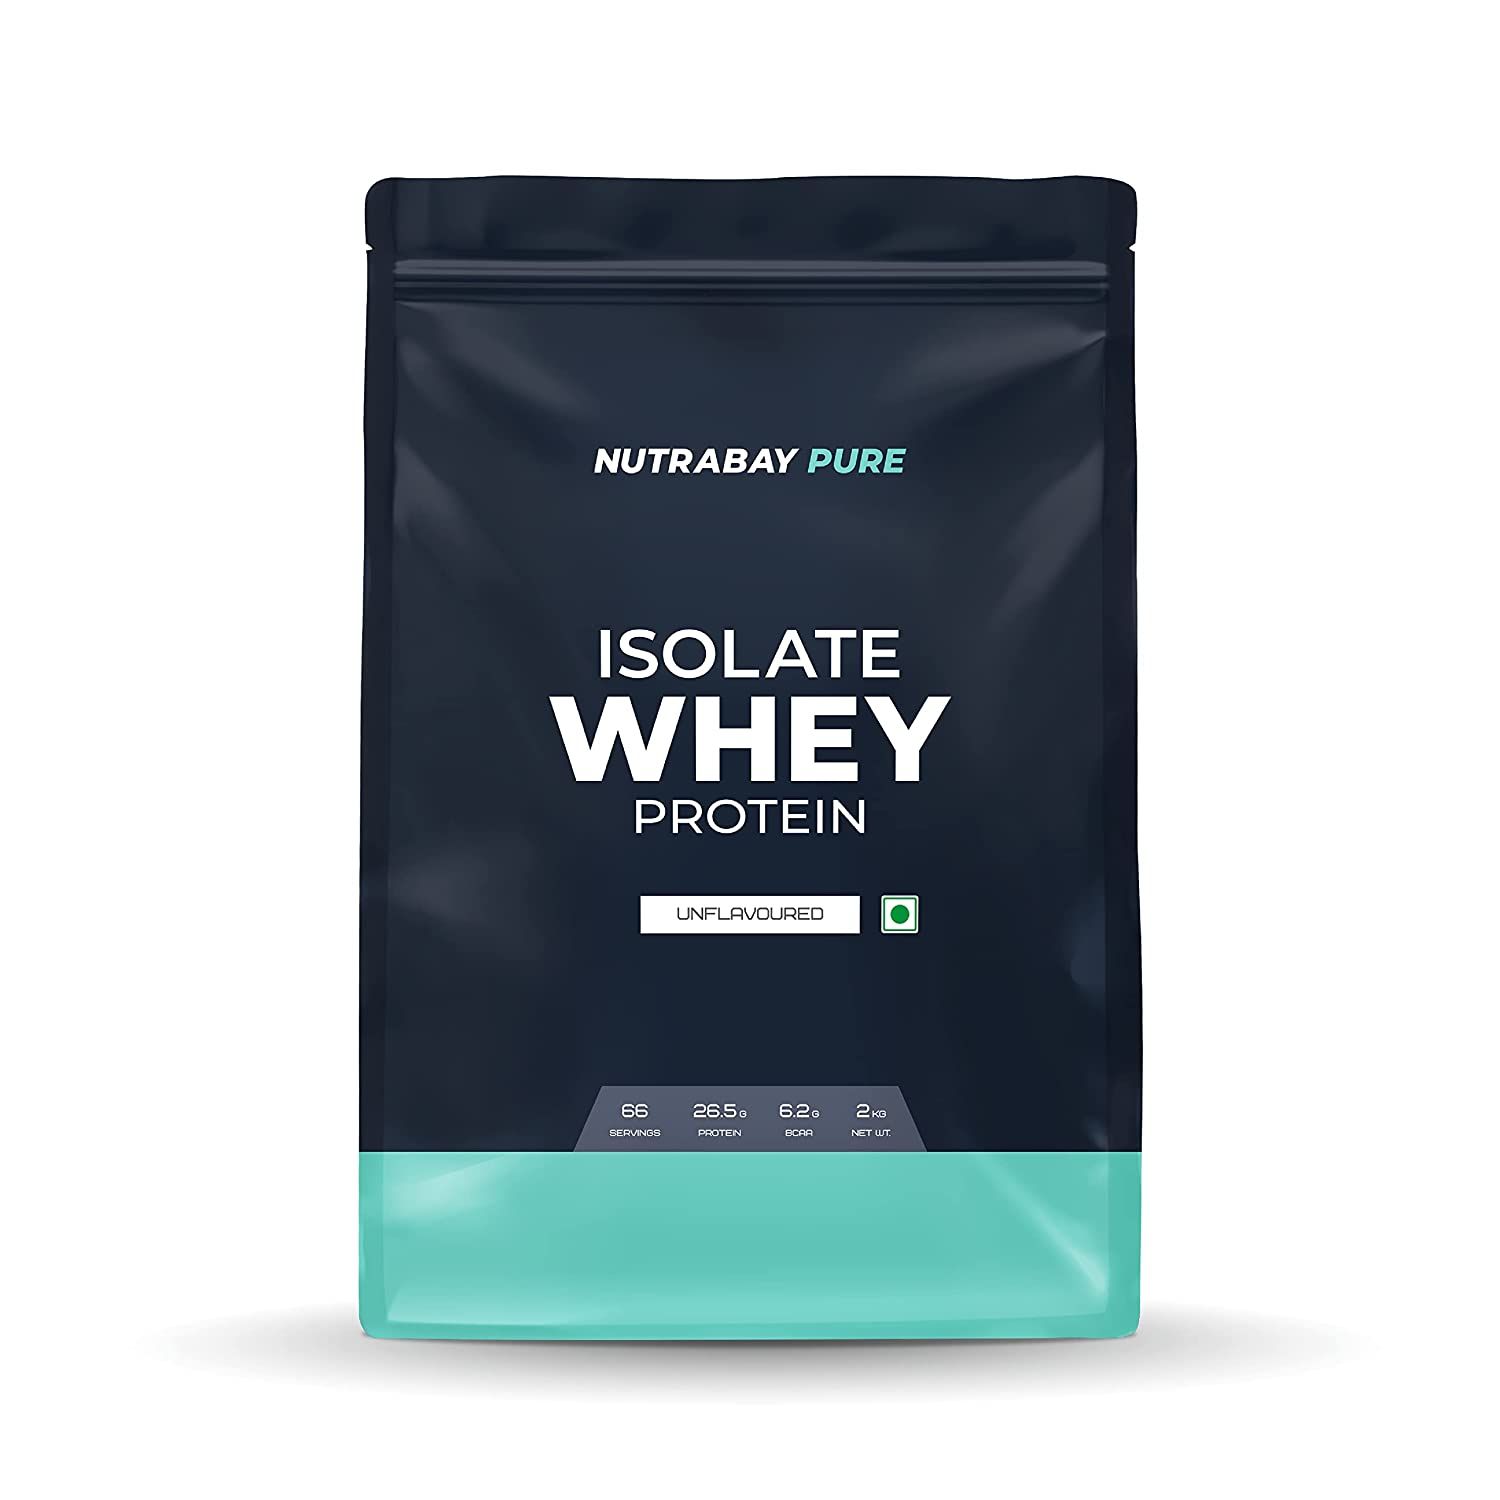 Nutrabay Pure Whey Protein Isolate Image